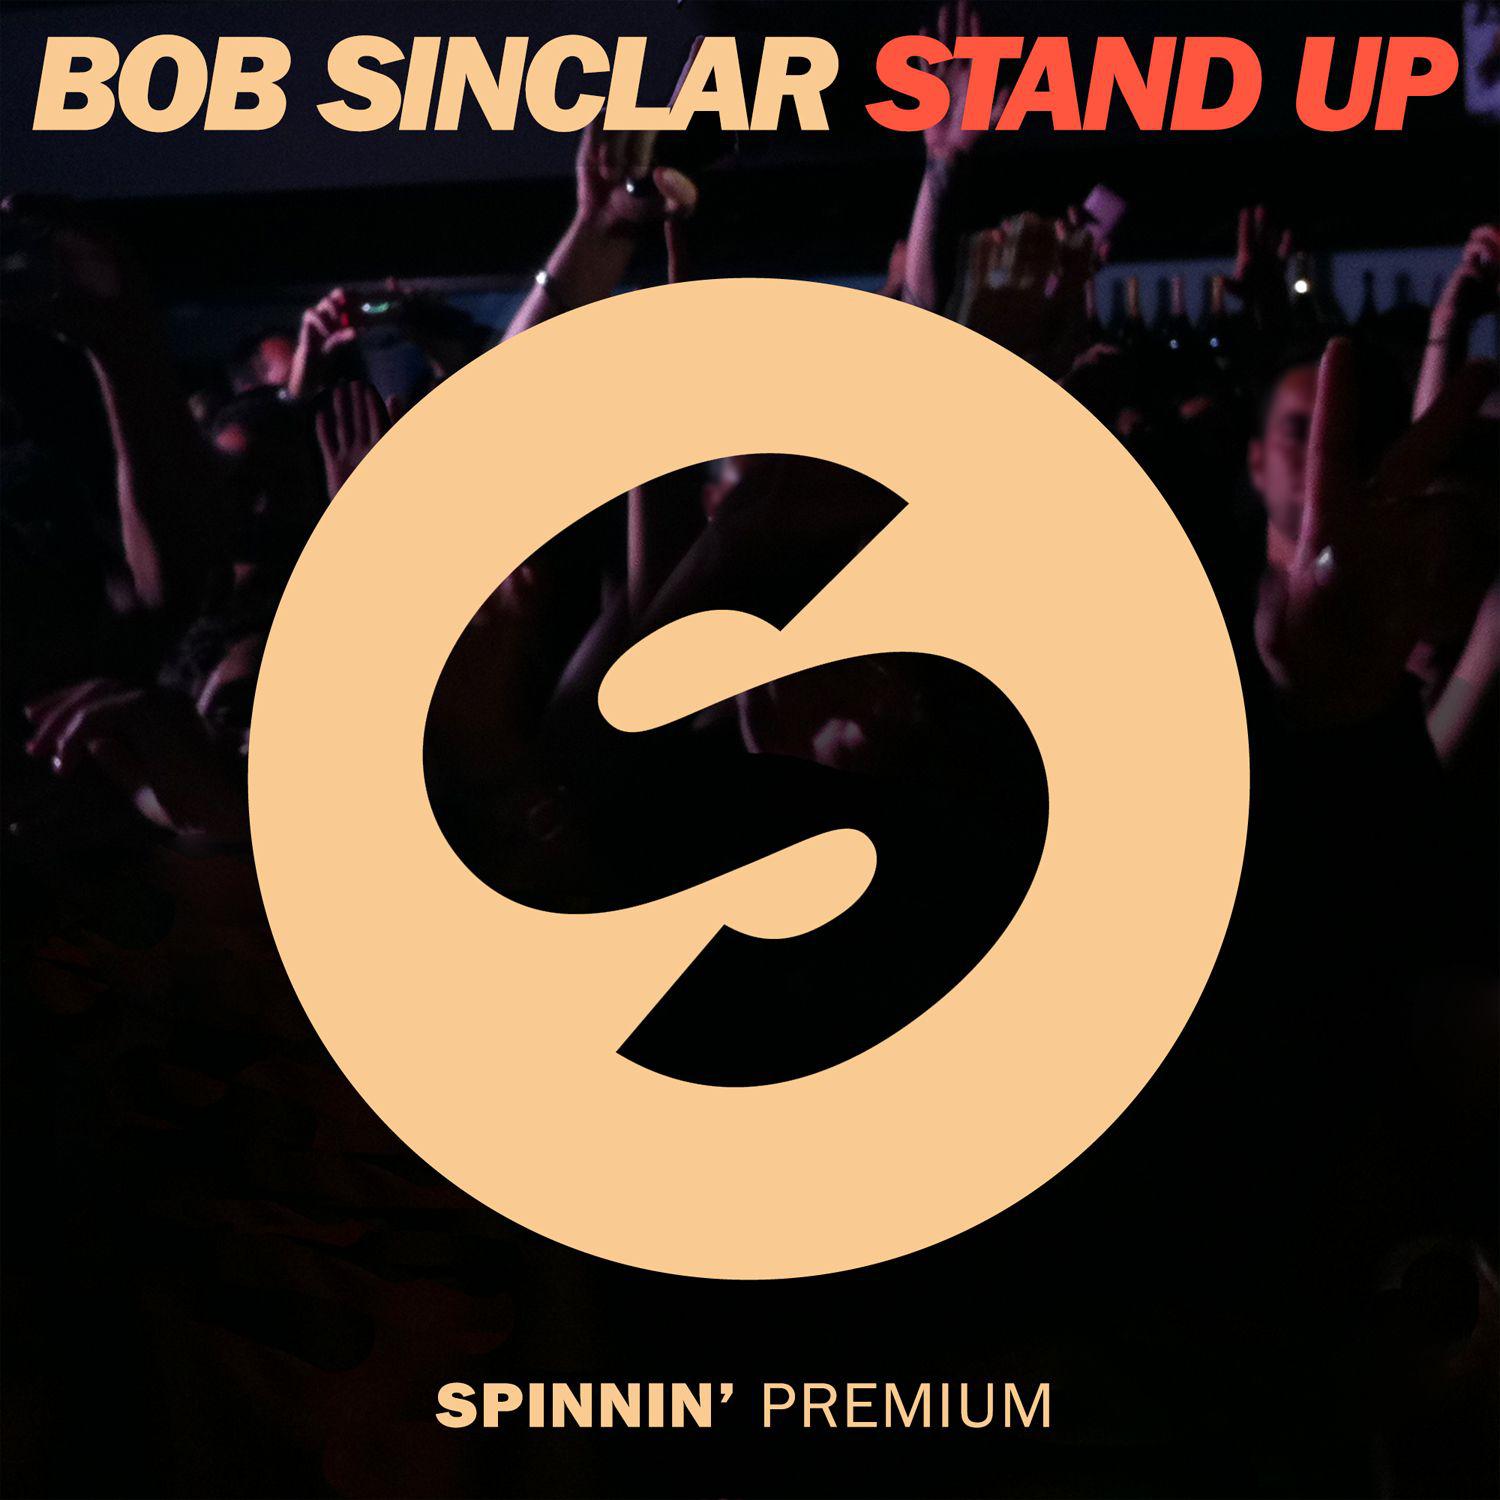 Stand Up (Club Mix)